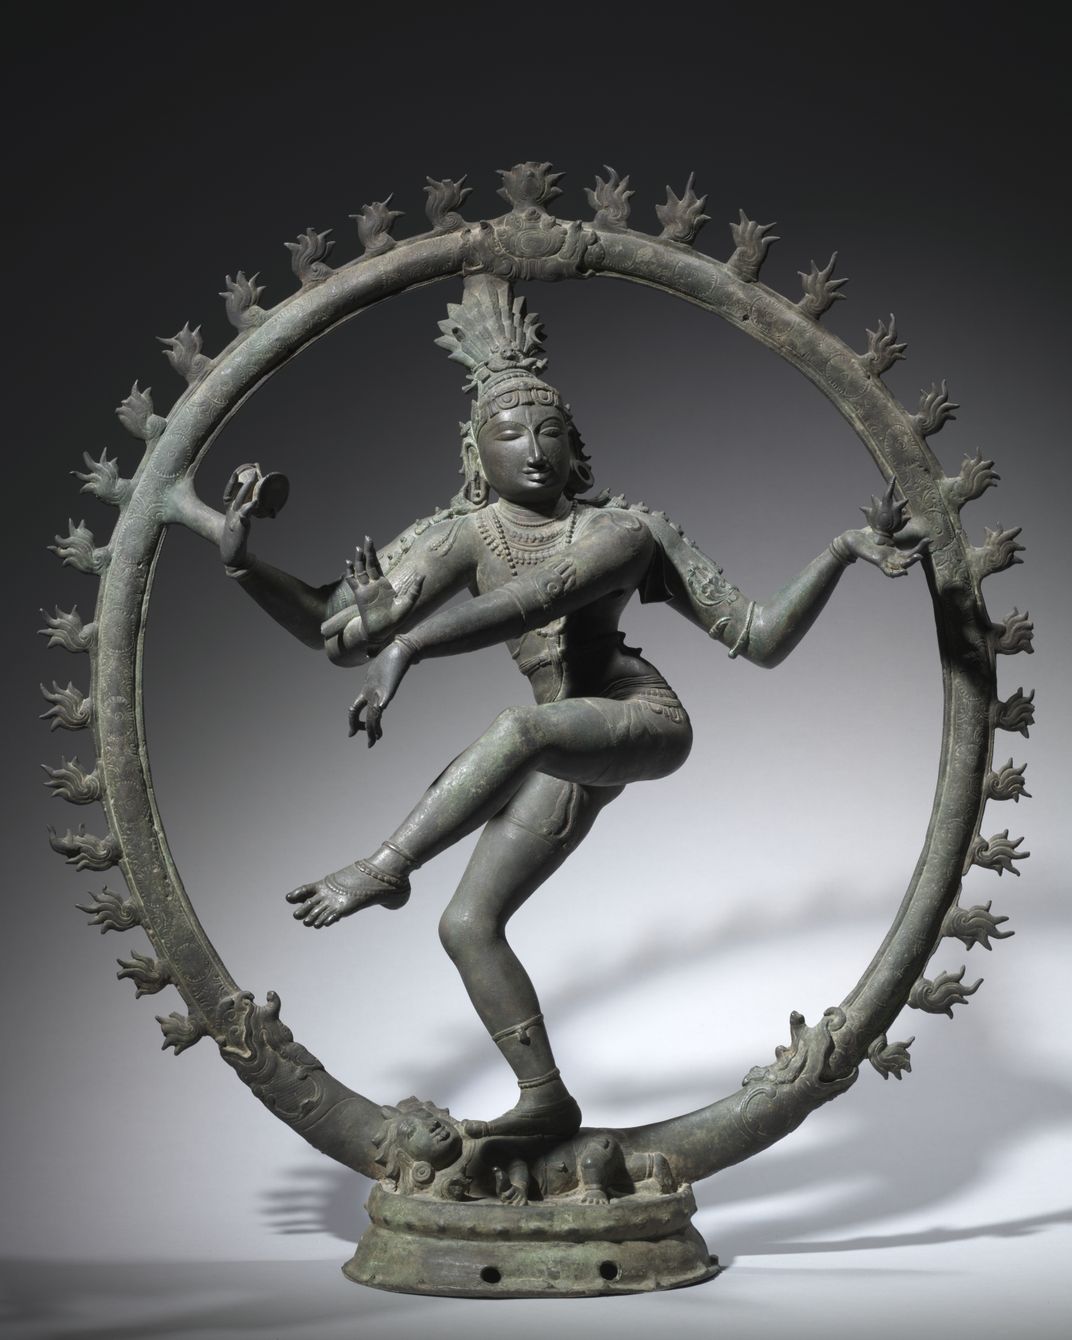 A statue of Shiva with limbs in motion